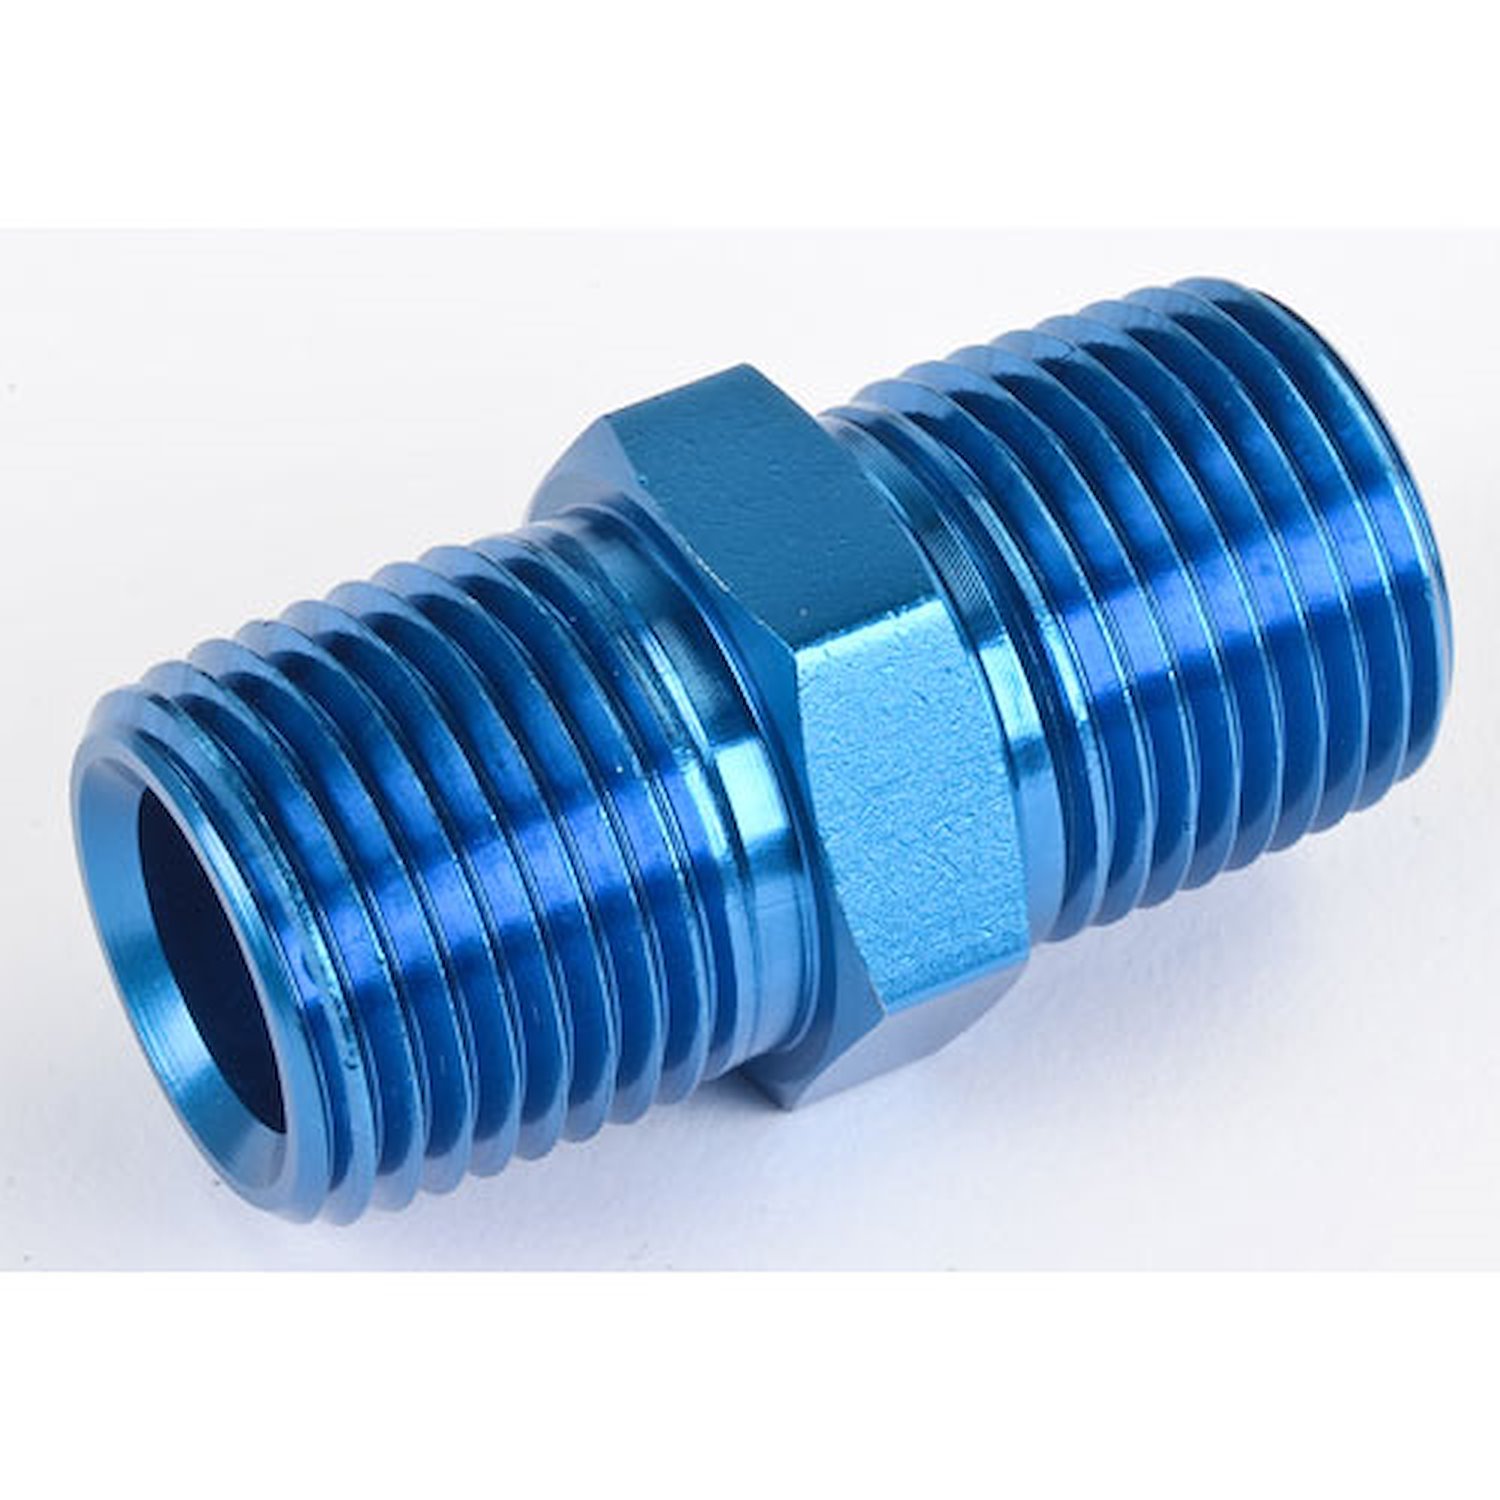 NPT to NPT Straight Union Fitting [1/2 in. NPT Male to 1/2 in. NPT Male, Blue]